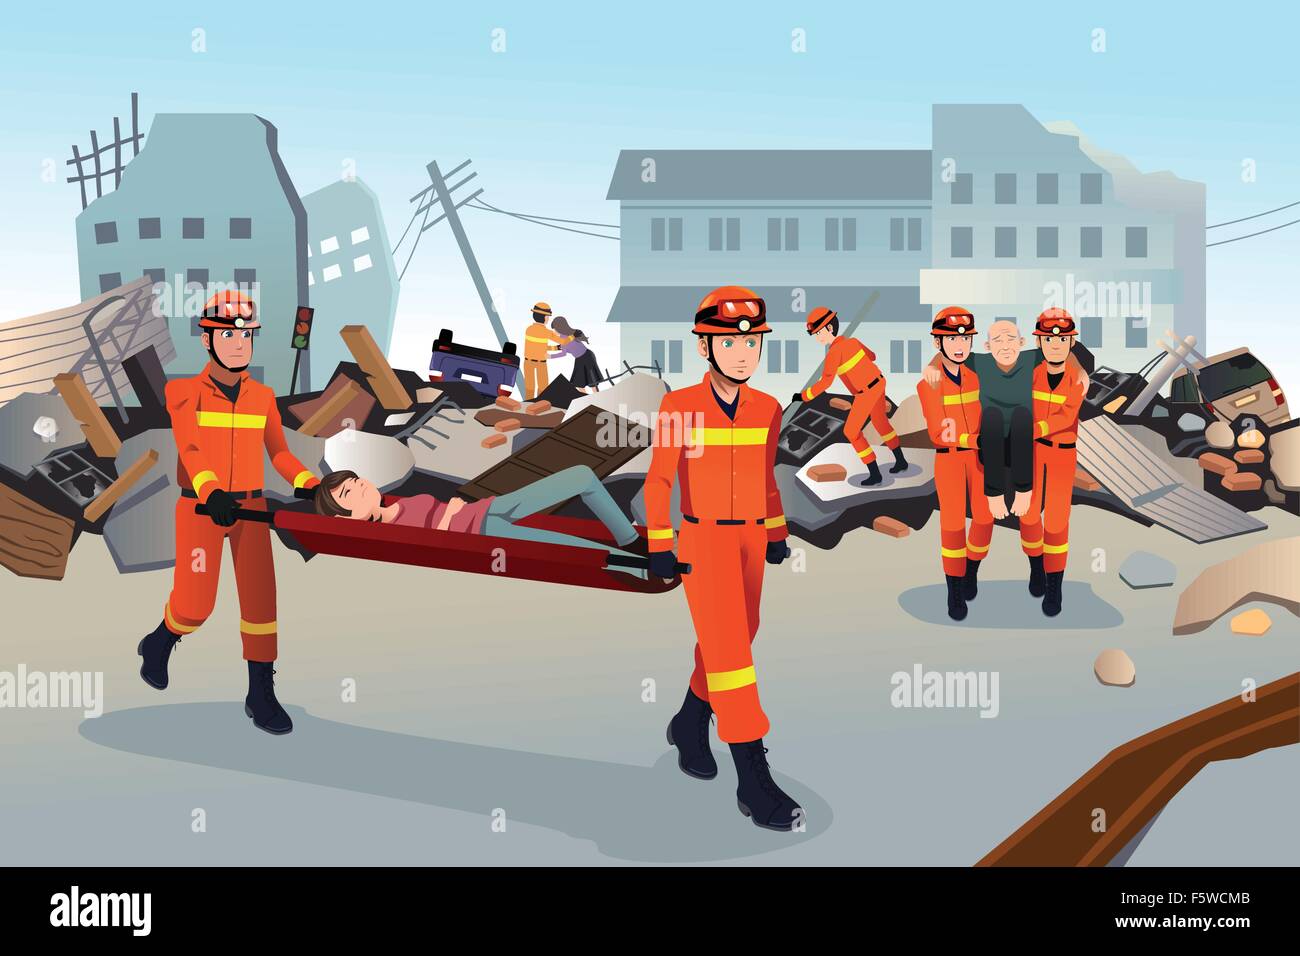 A vector illustration of rescue teams searching through the